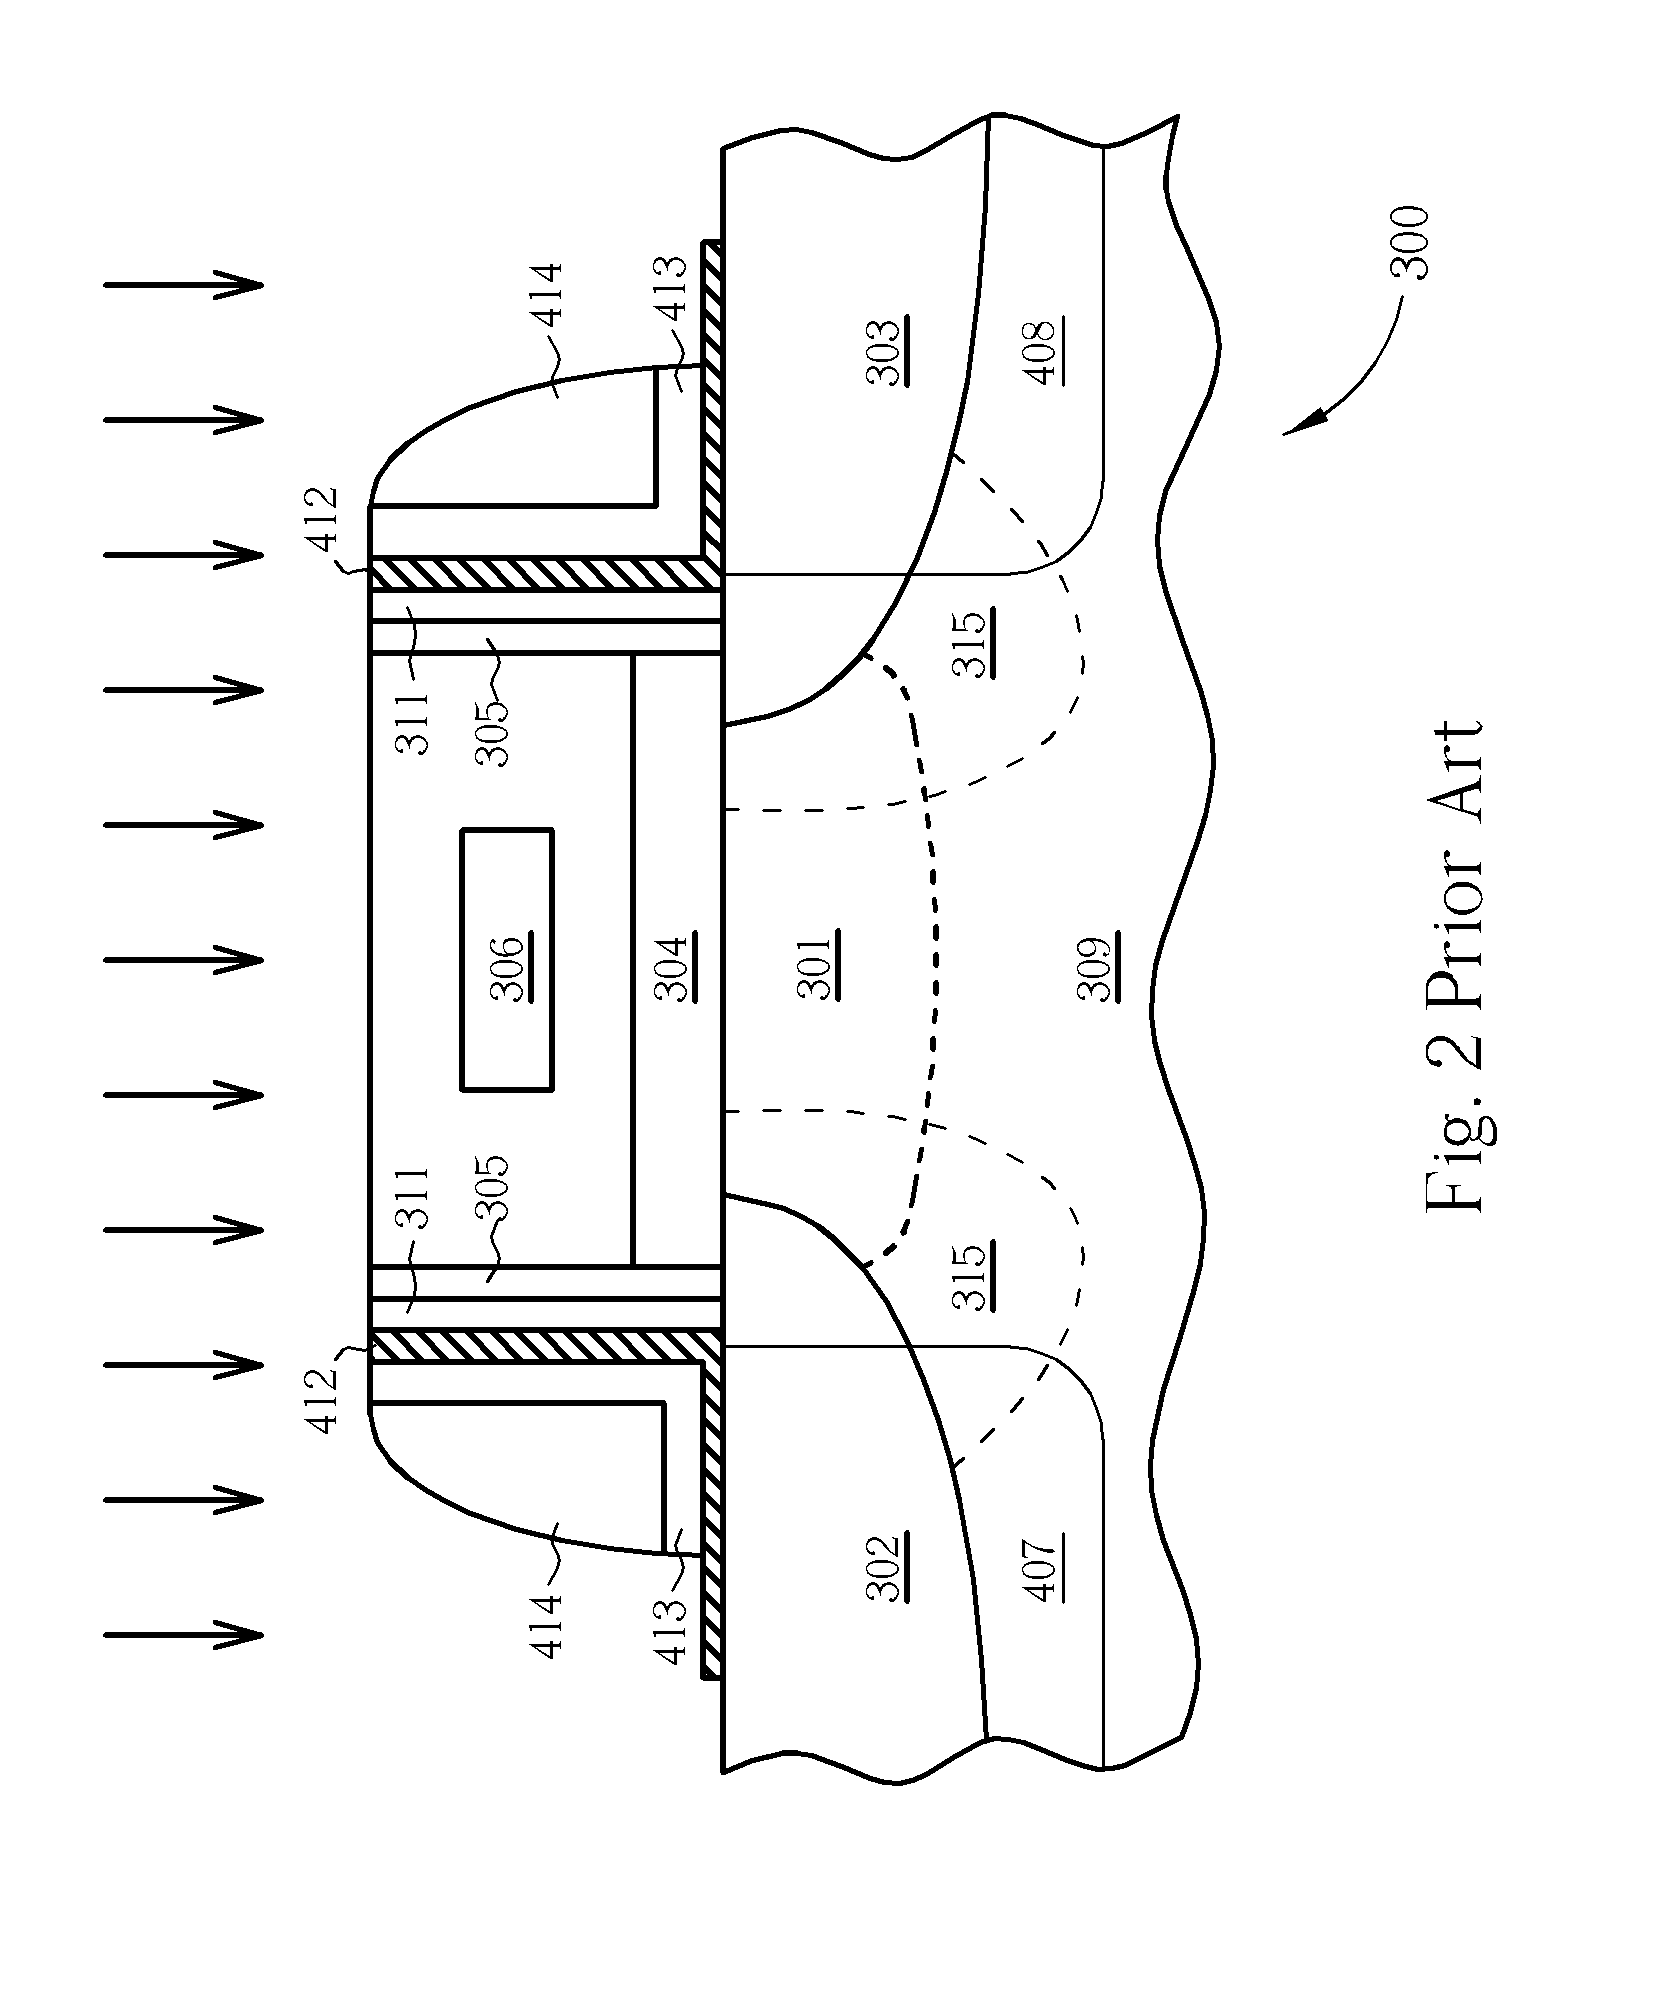 Metal-oxide-semiconductor transistor and method of forming the same